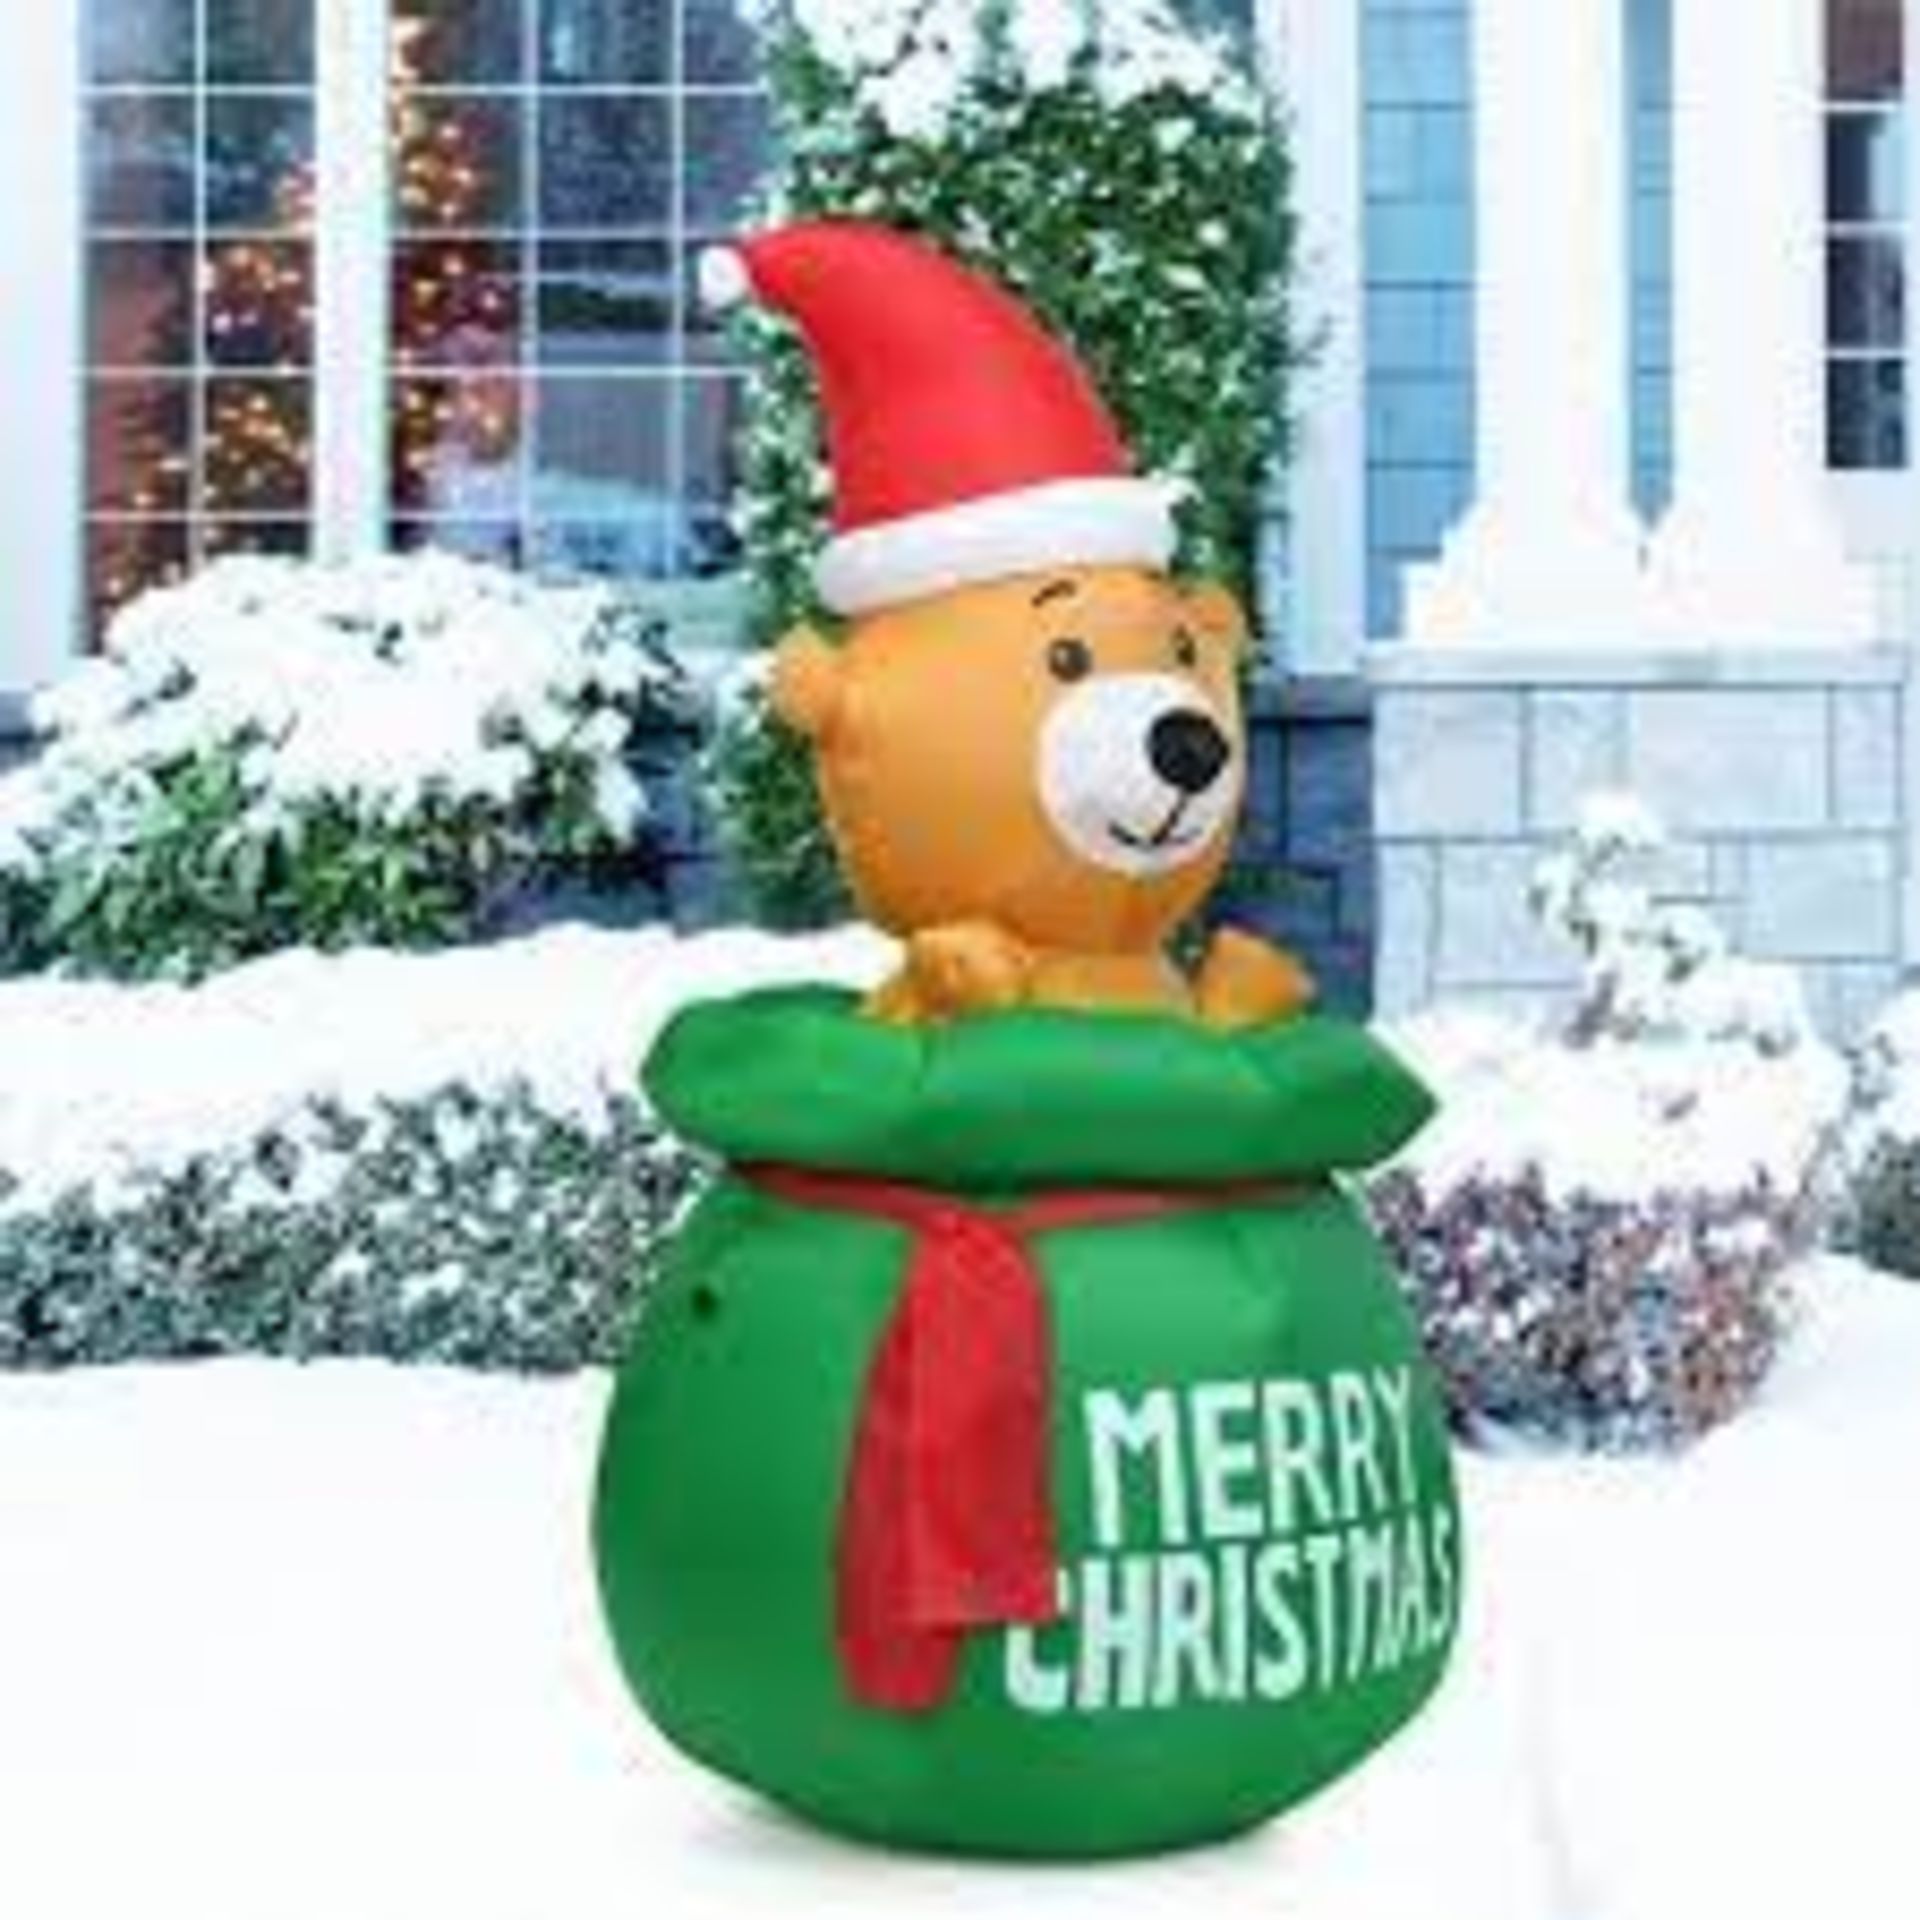 1.5M BLOW UP INFLATABLE LED CHRISTMAS CUTE BEAR WITH SANTA HAT. - R13.16.